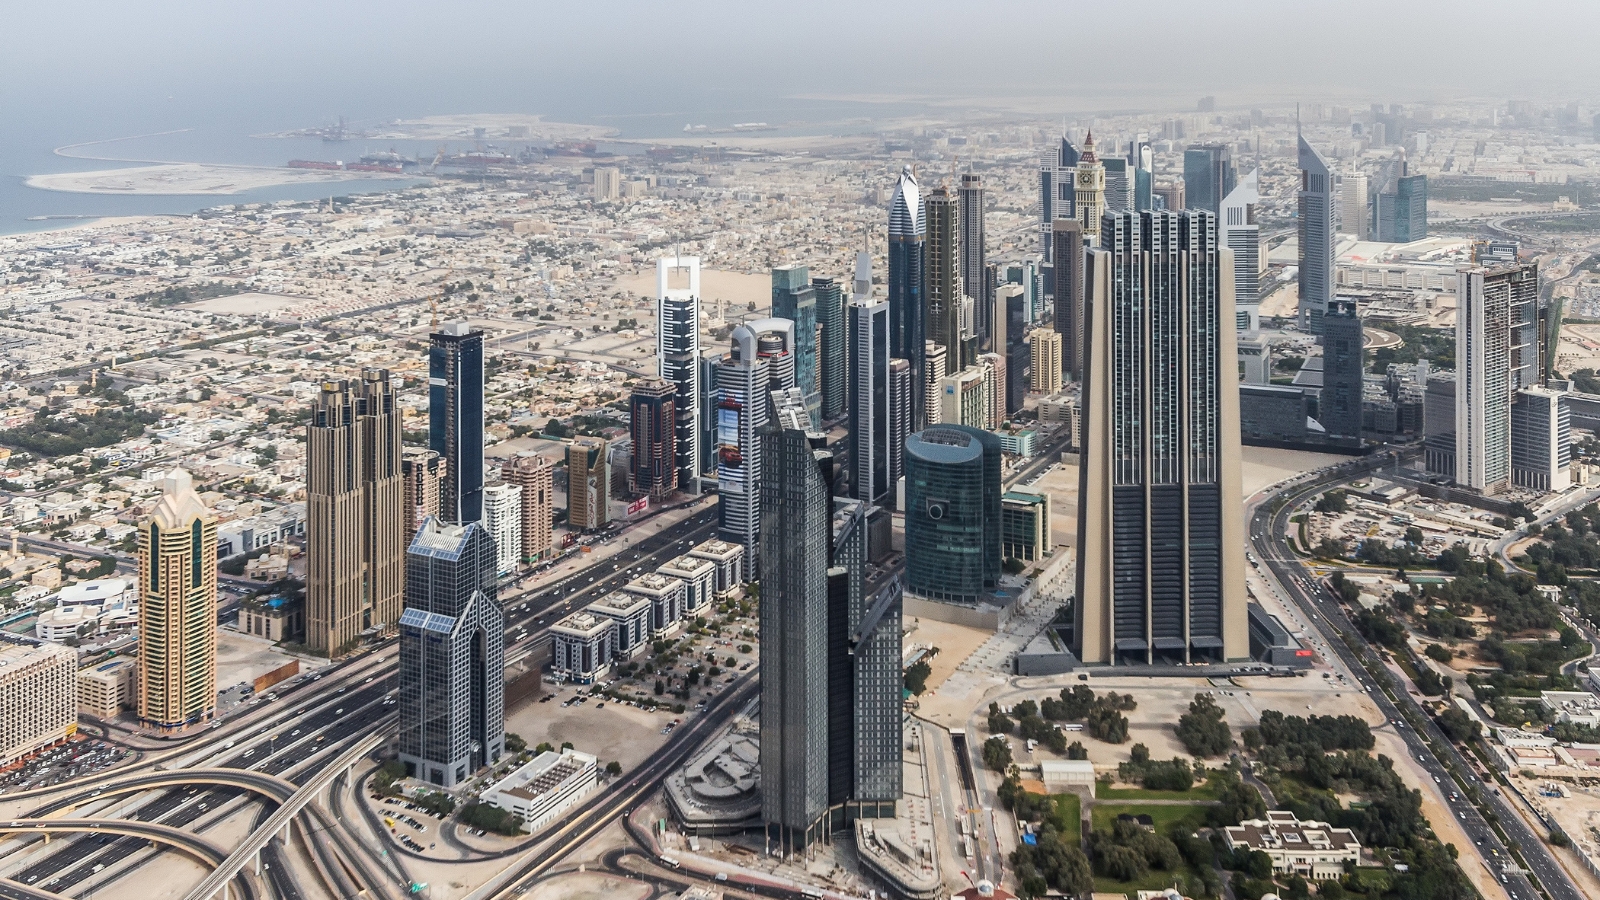 Knight Frank: 320,000 new hotel rooms expected in Saudi Arabia by 2030